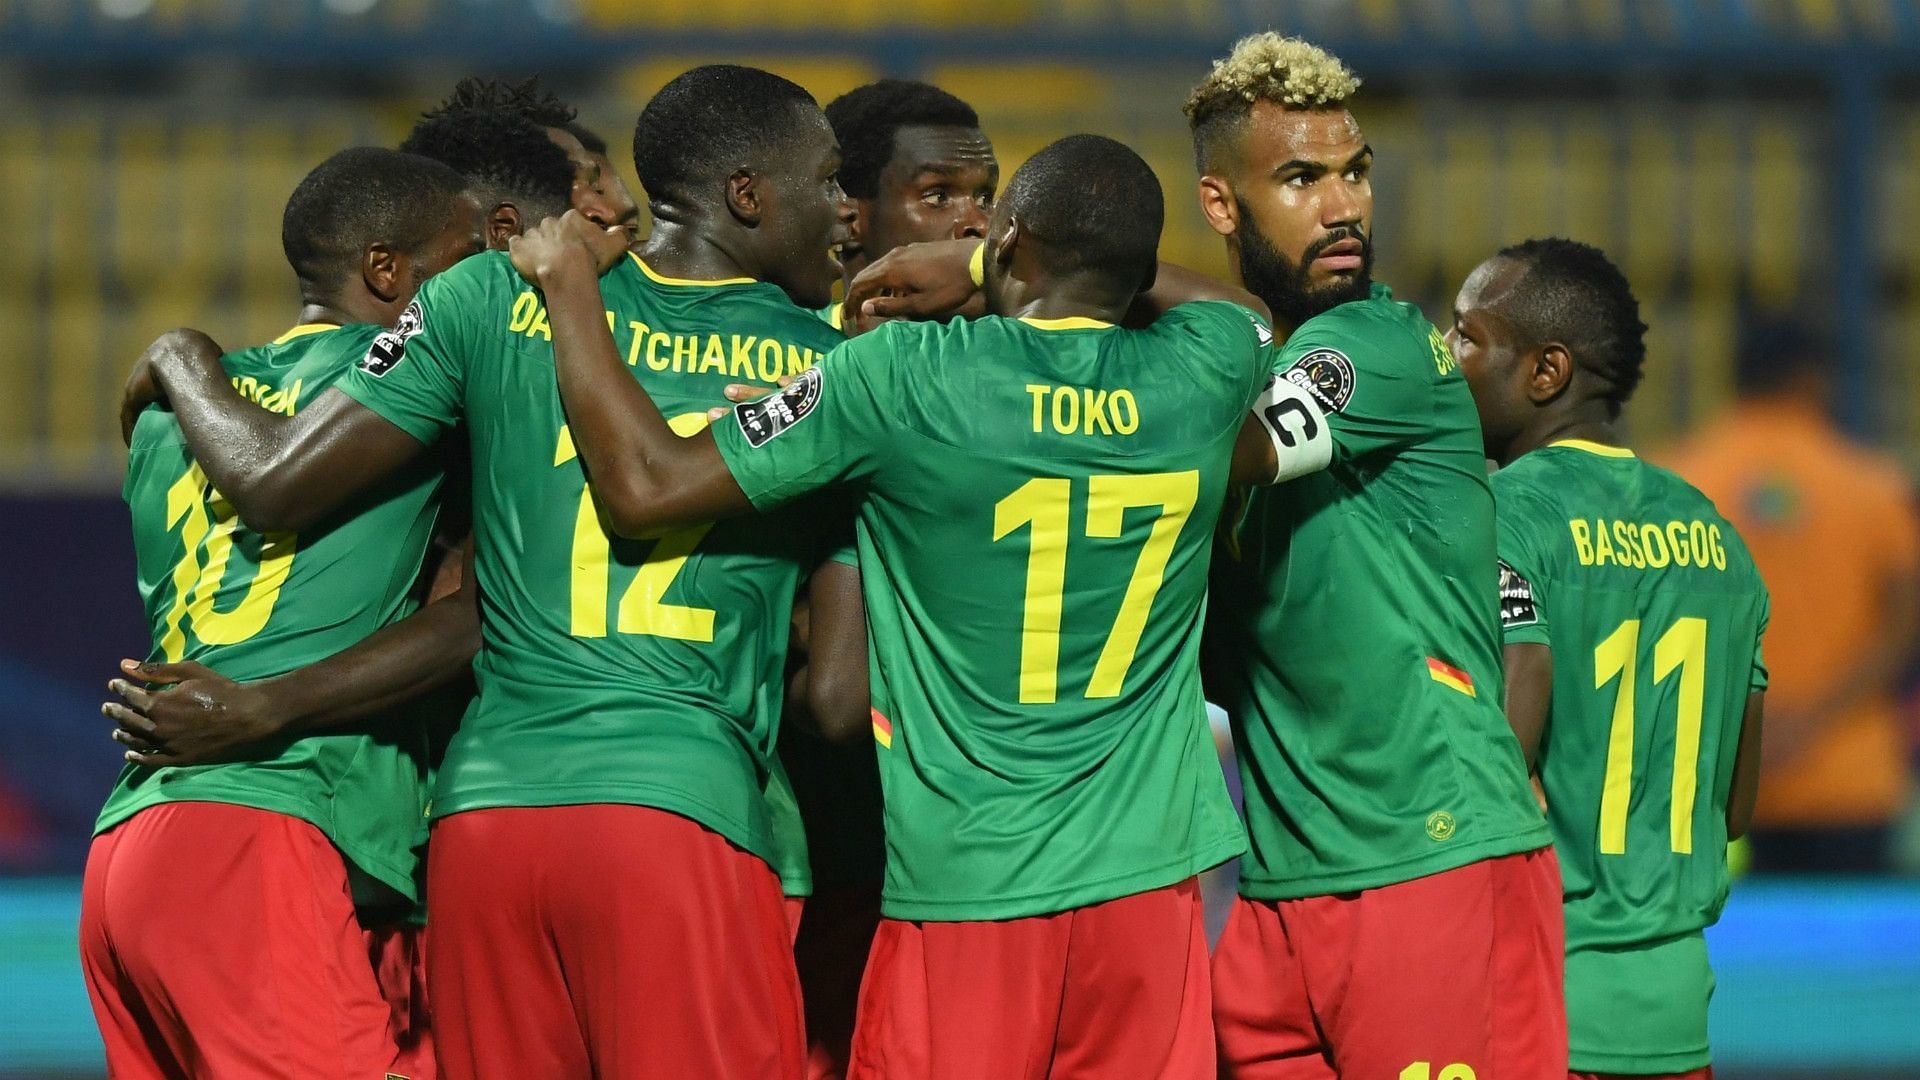 Malawi host Cameroon in their upcoming FIFA World Cup qualifying fixture on Saturday